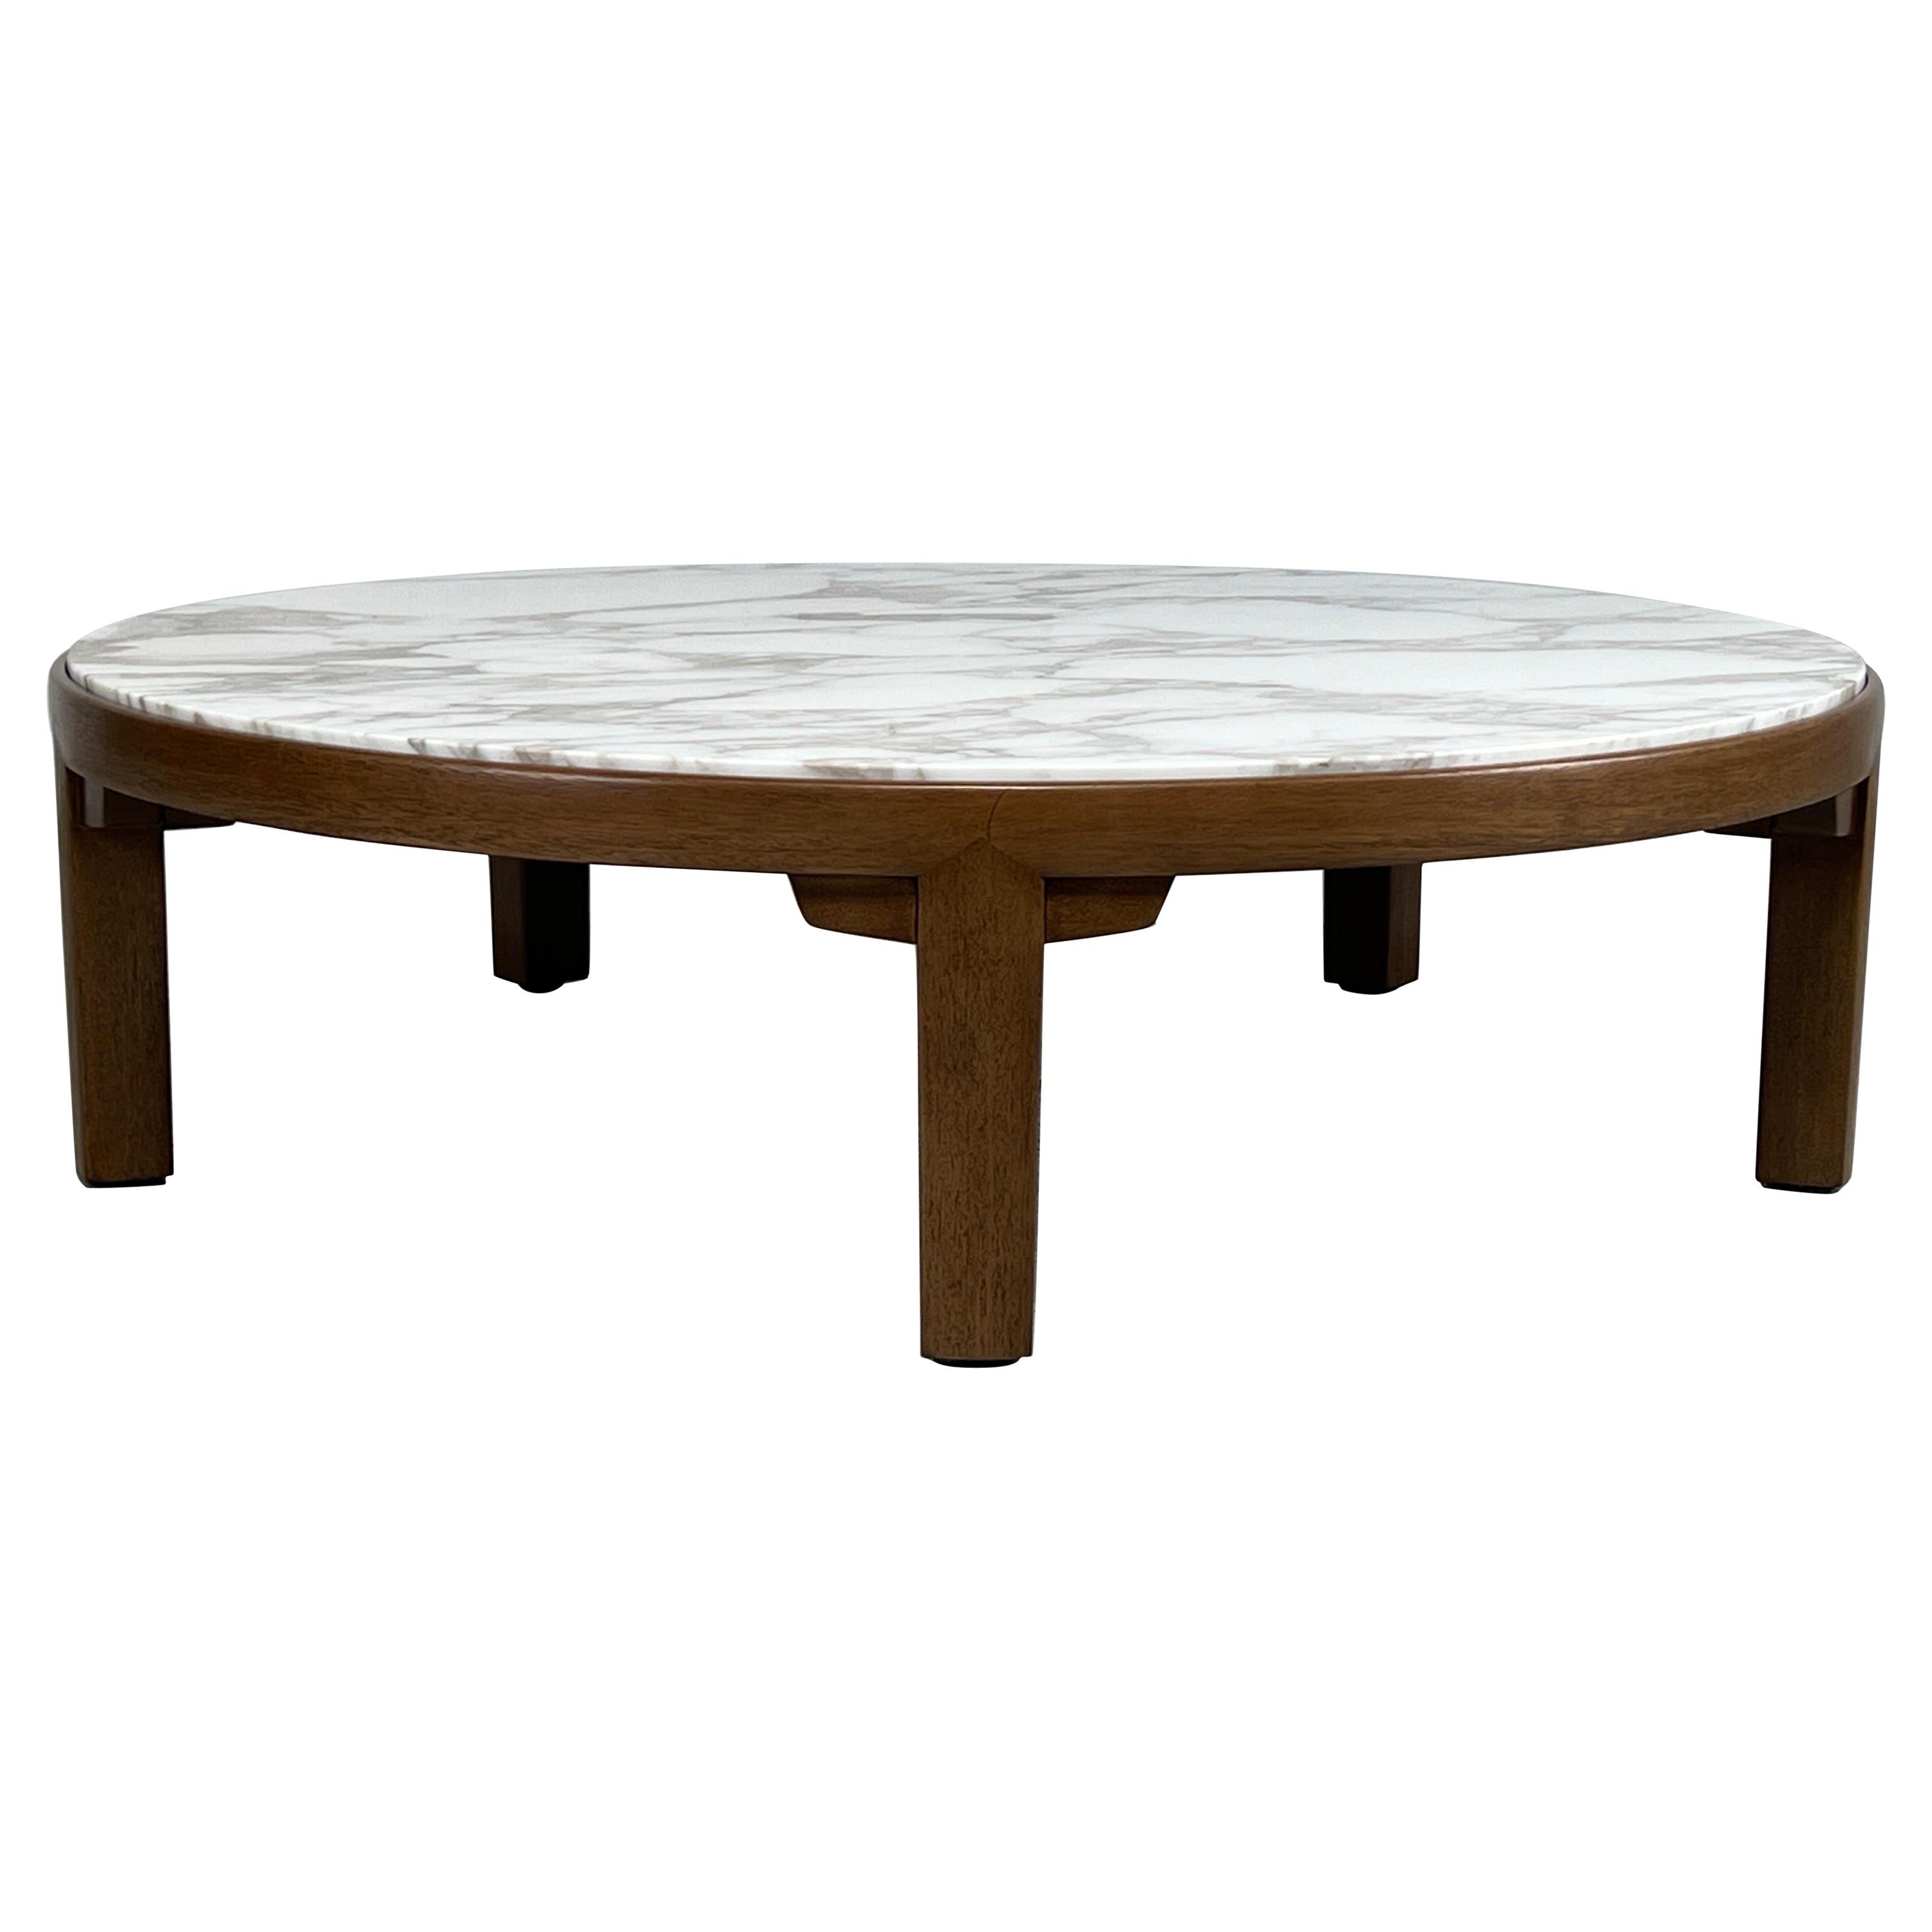 Edward Wormley for Dunbar Mahogany Coffee Table with Marble Top